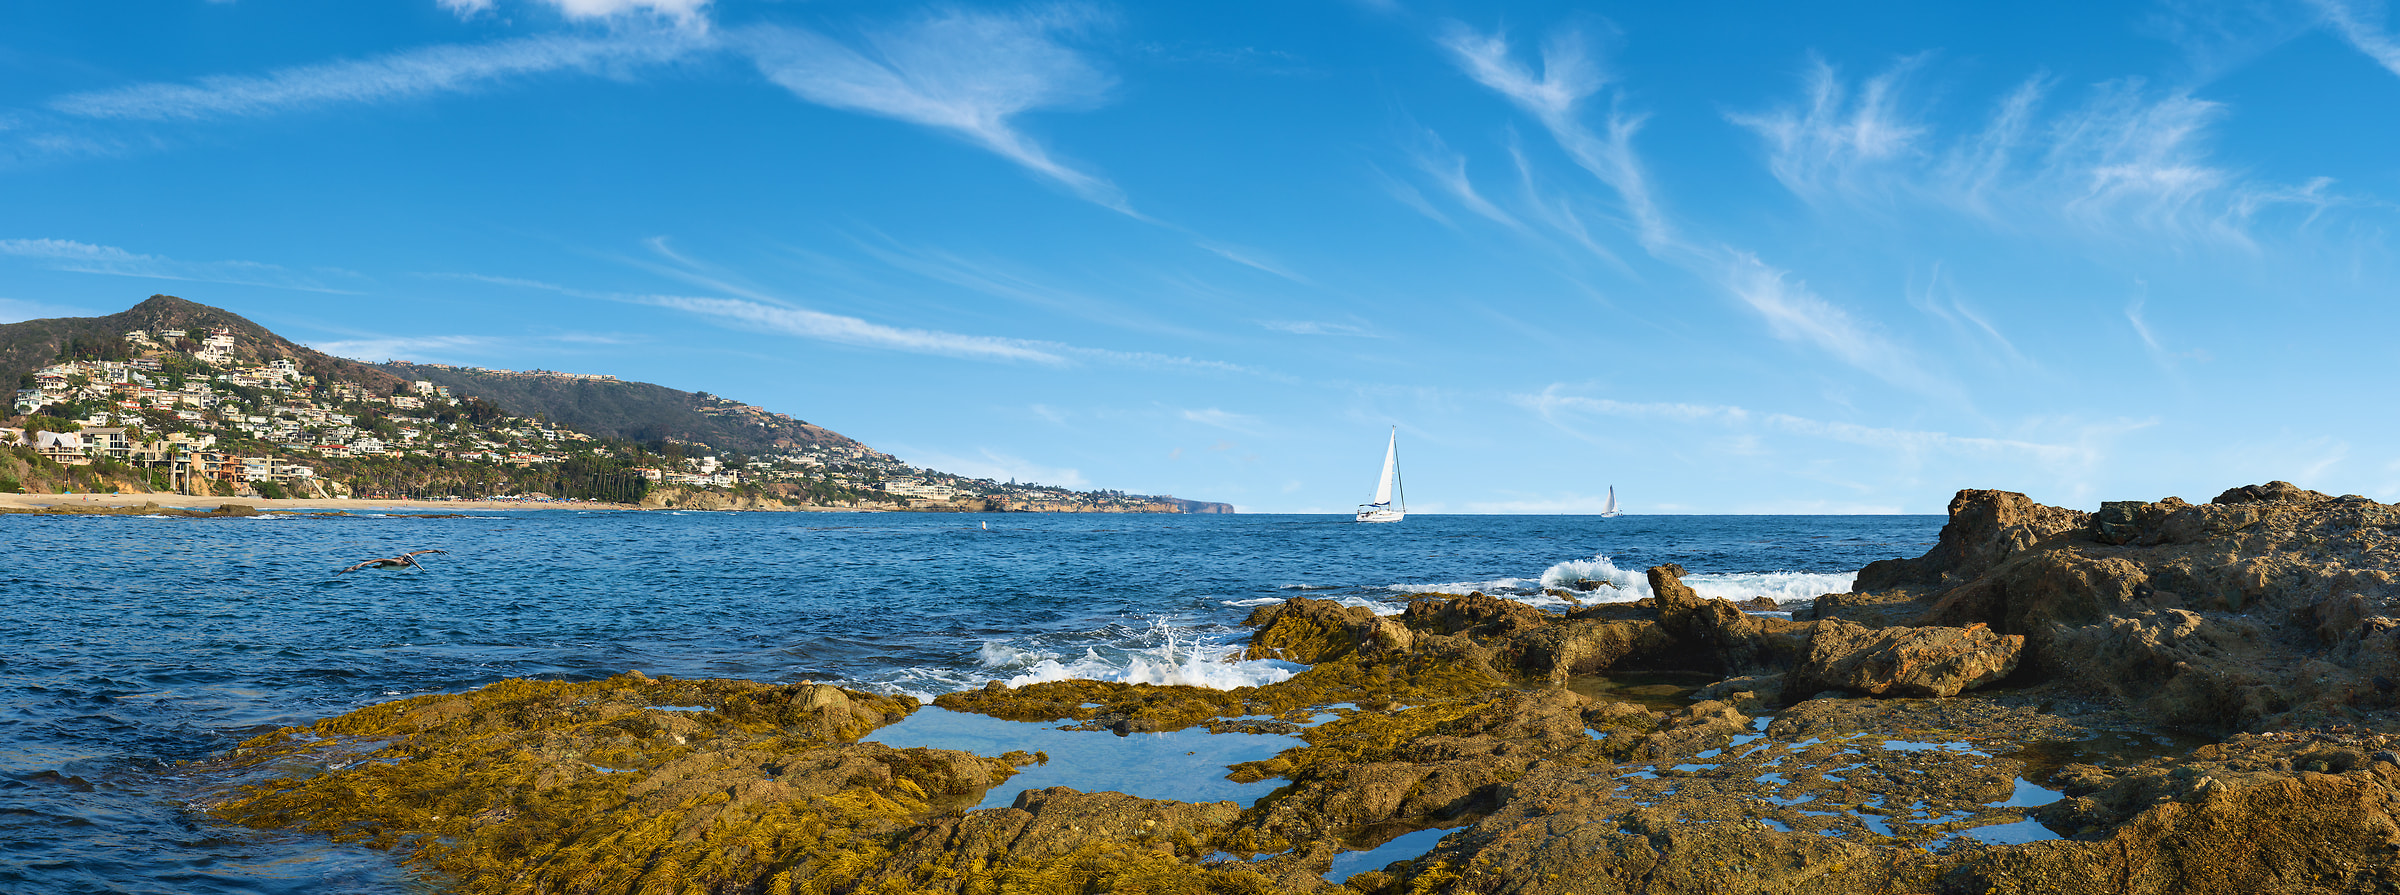 141 megapixels! A very high resolution, large-format VAST photo print of a sailboat on the ocean with rocks and waves in the foreground; seascape photograph created by Jim Tarpo in Laguna Beach, California.